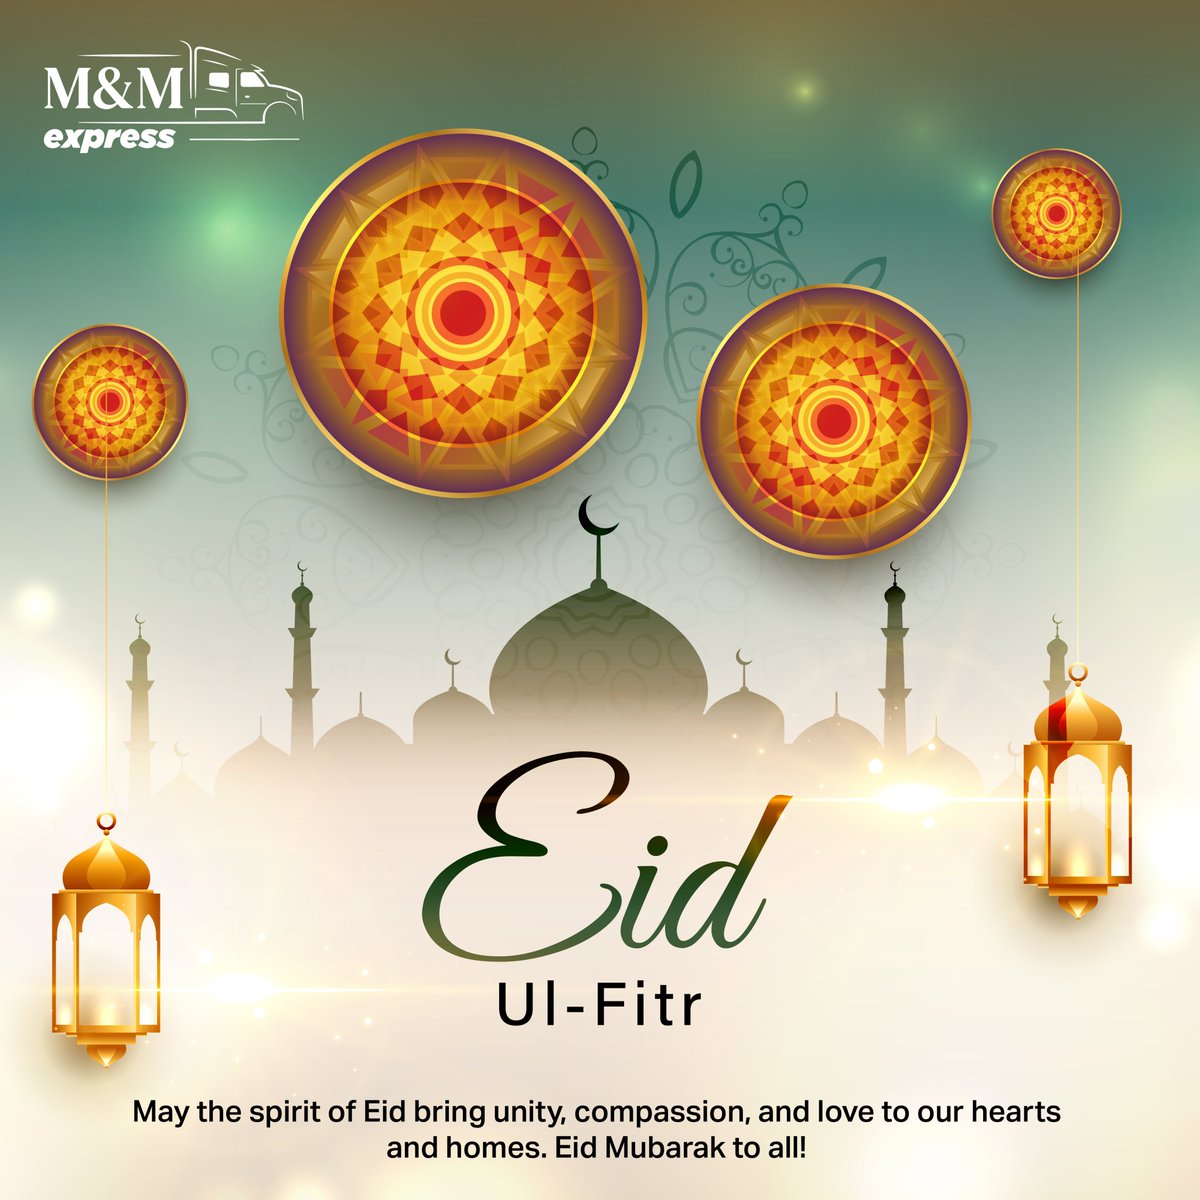 Eid Mubarak from MnM Express! May your home be filled with warmth, love, and blessings on this special day.
#Eidmubarak2024  #MnMExpress #movingcompany #professionalmovers #EidDiscount